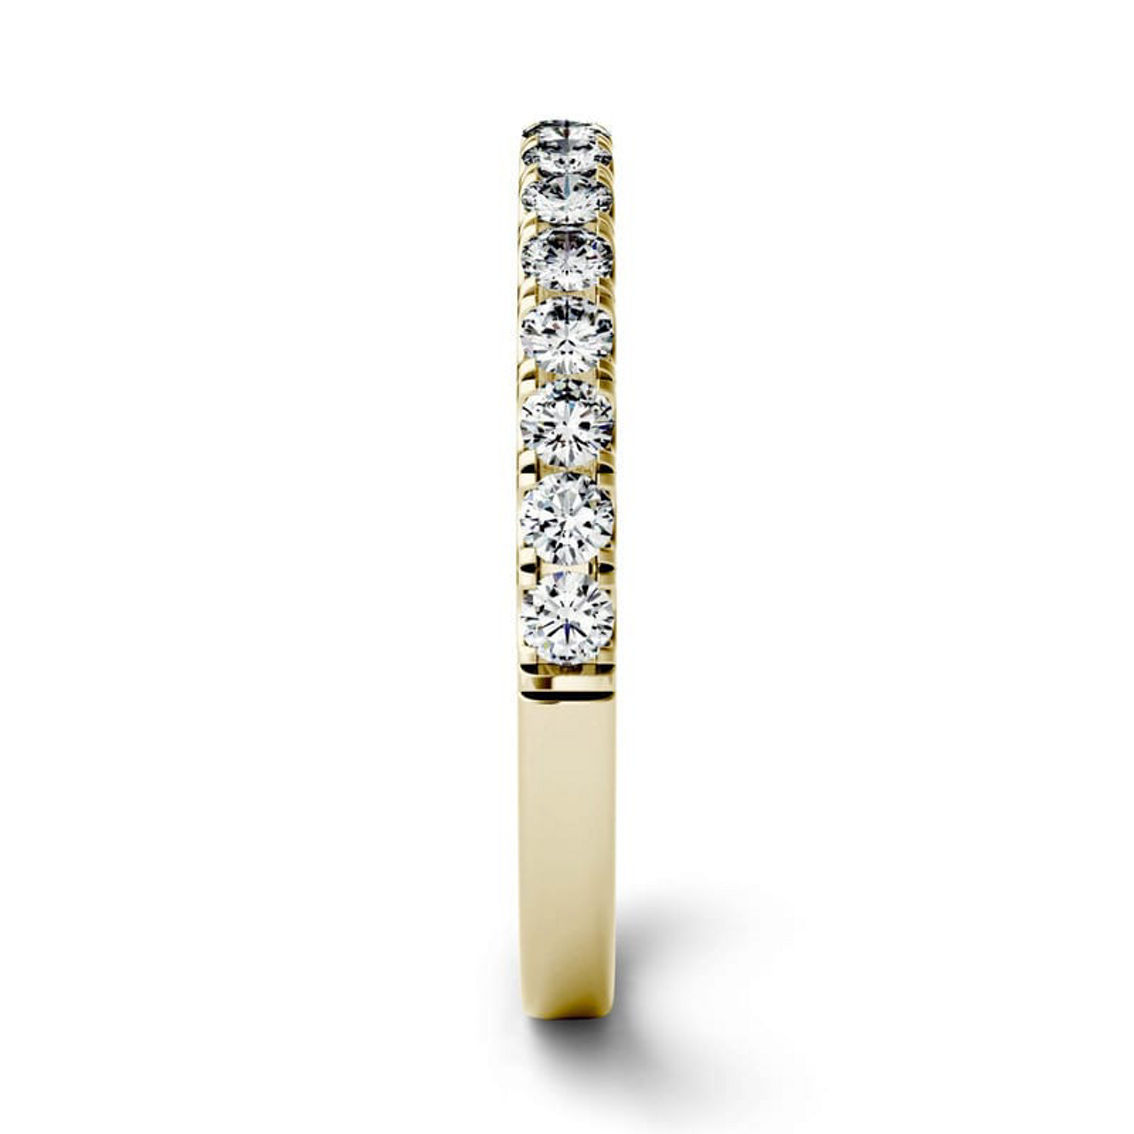 Charles & Colvard 0.38cttw Moissanite Wedding Band in 14k Yellow Gold - Image 3 of 5